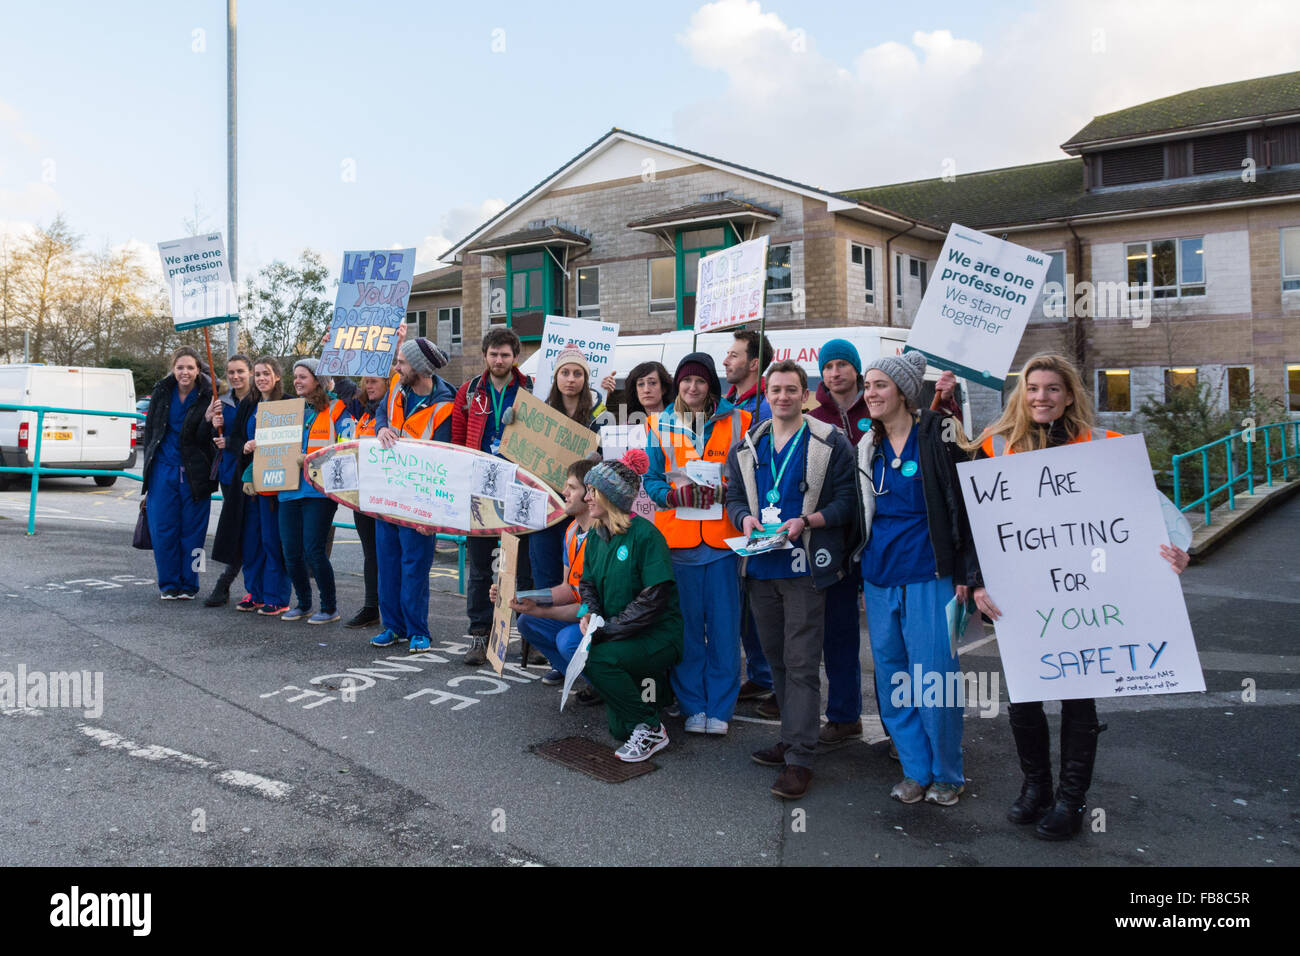 Truro, Cornwall, UK. 12th January 2016. Junior doctors protest outside Royal Cornwall Hospital in Truro, in the very far south west of the country. Credit:  Simon Maycock/Alamy Live News Stock Photo